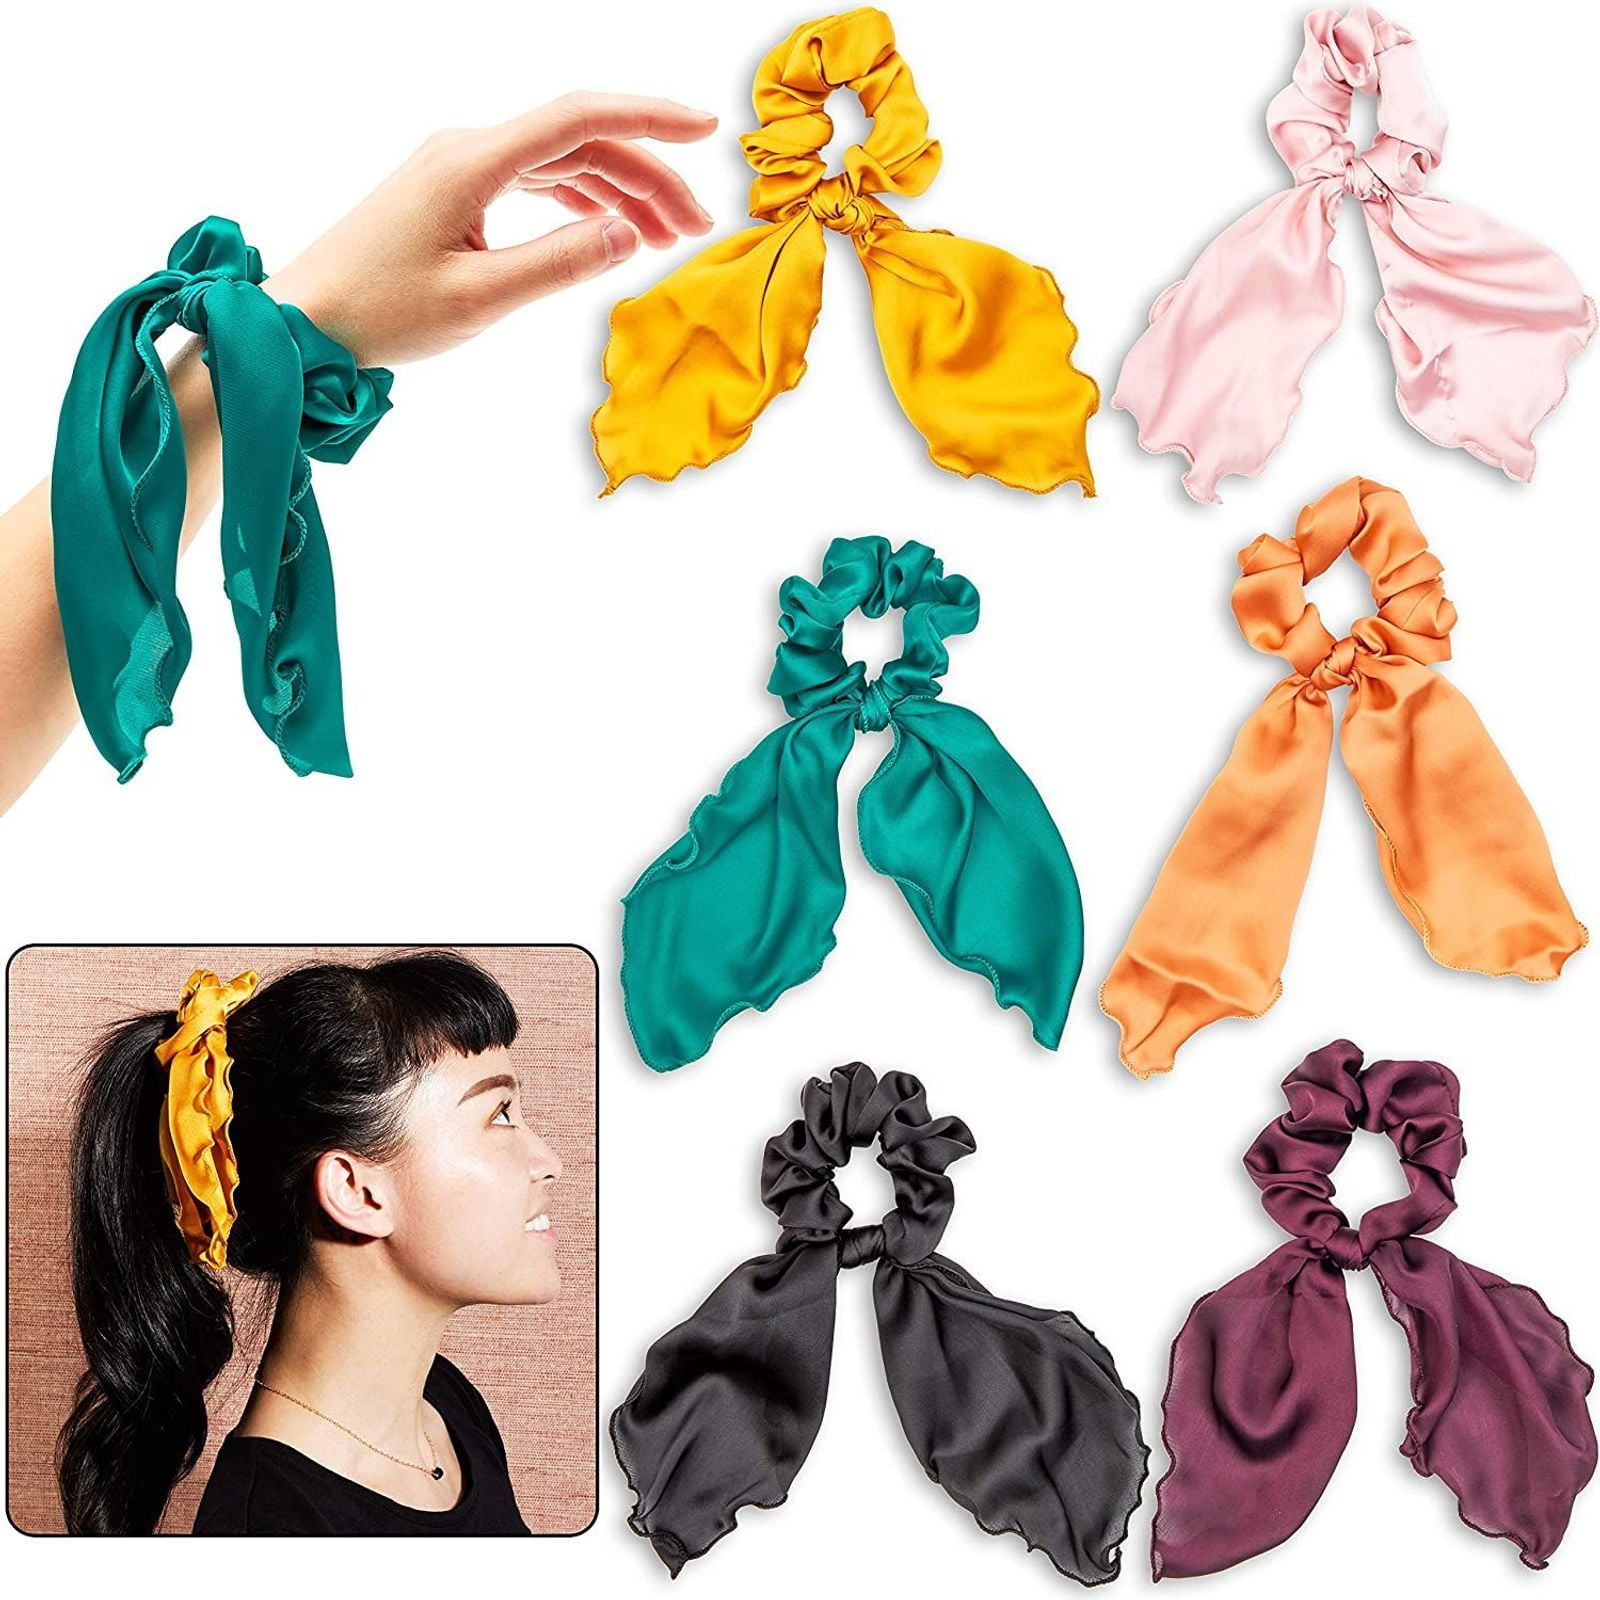 Bright Neon Hair Scrunchies Hair Bands for Women Bow Knot Bunny Ear Elastic Ties